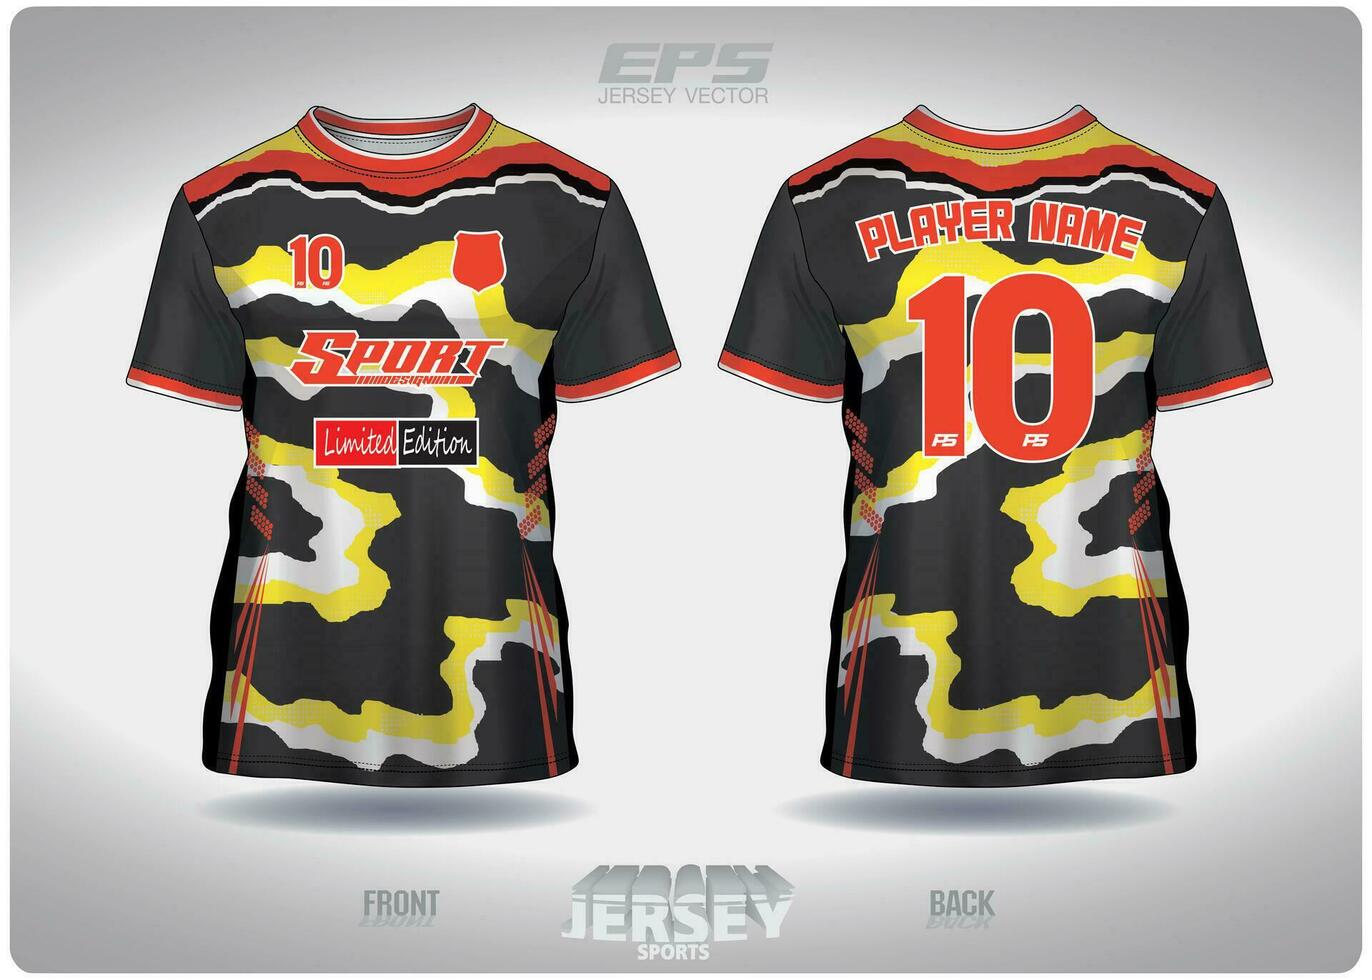 EPS jersey sports shirt vector.torn paper black red yellow pattern design, illustration, textile background for round neck sports t-shirt, football jersey shirt vector